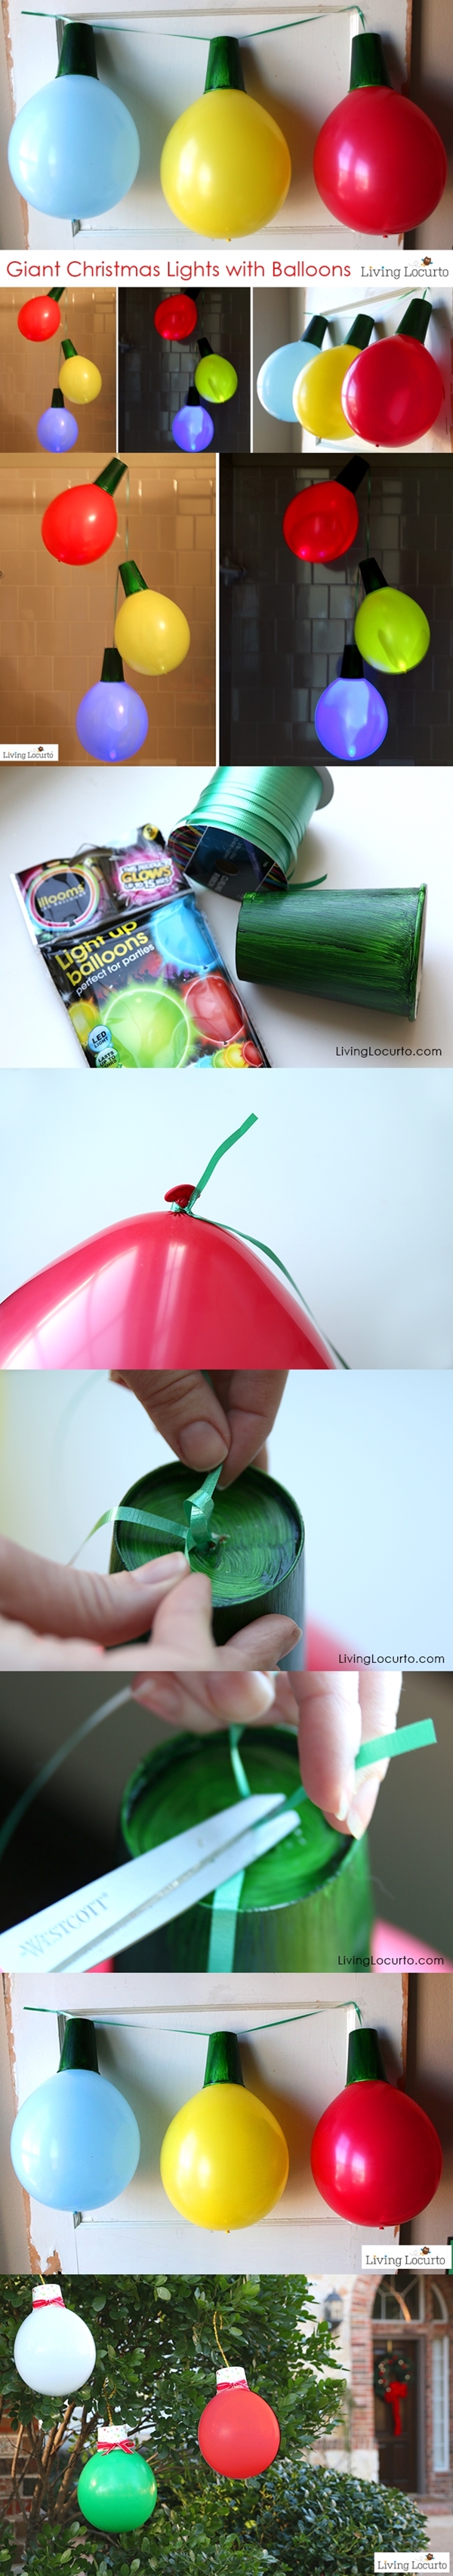 diy-filled-balloons-decoration-ideas-perfect-party-item